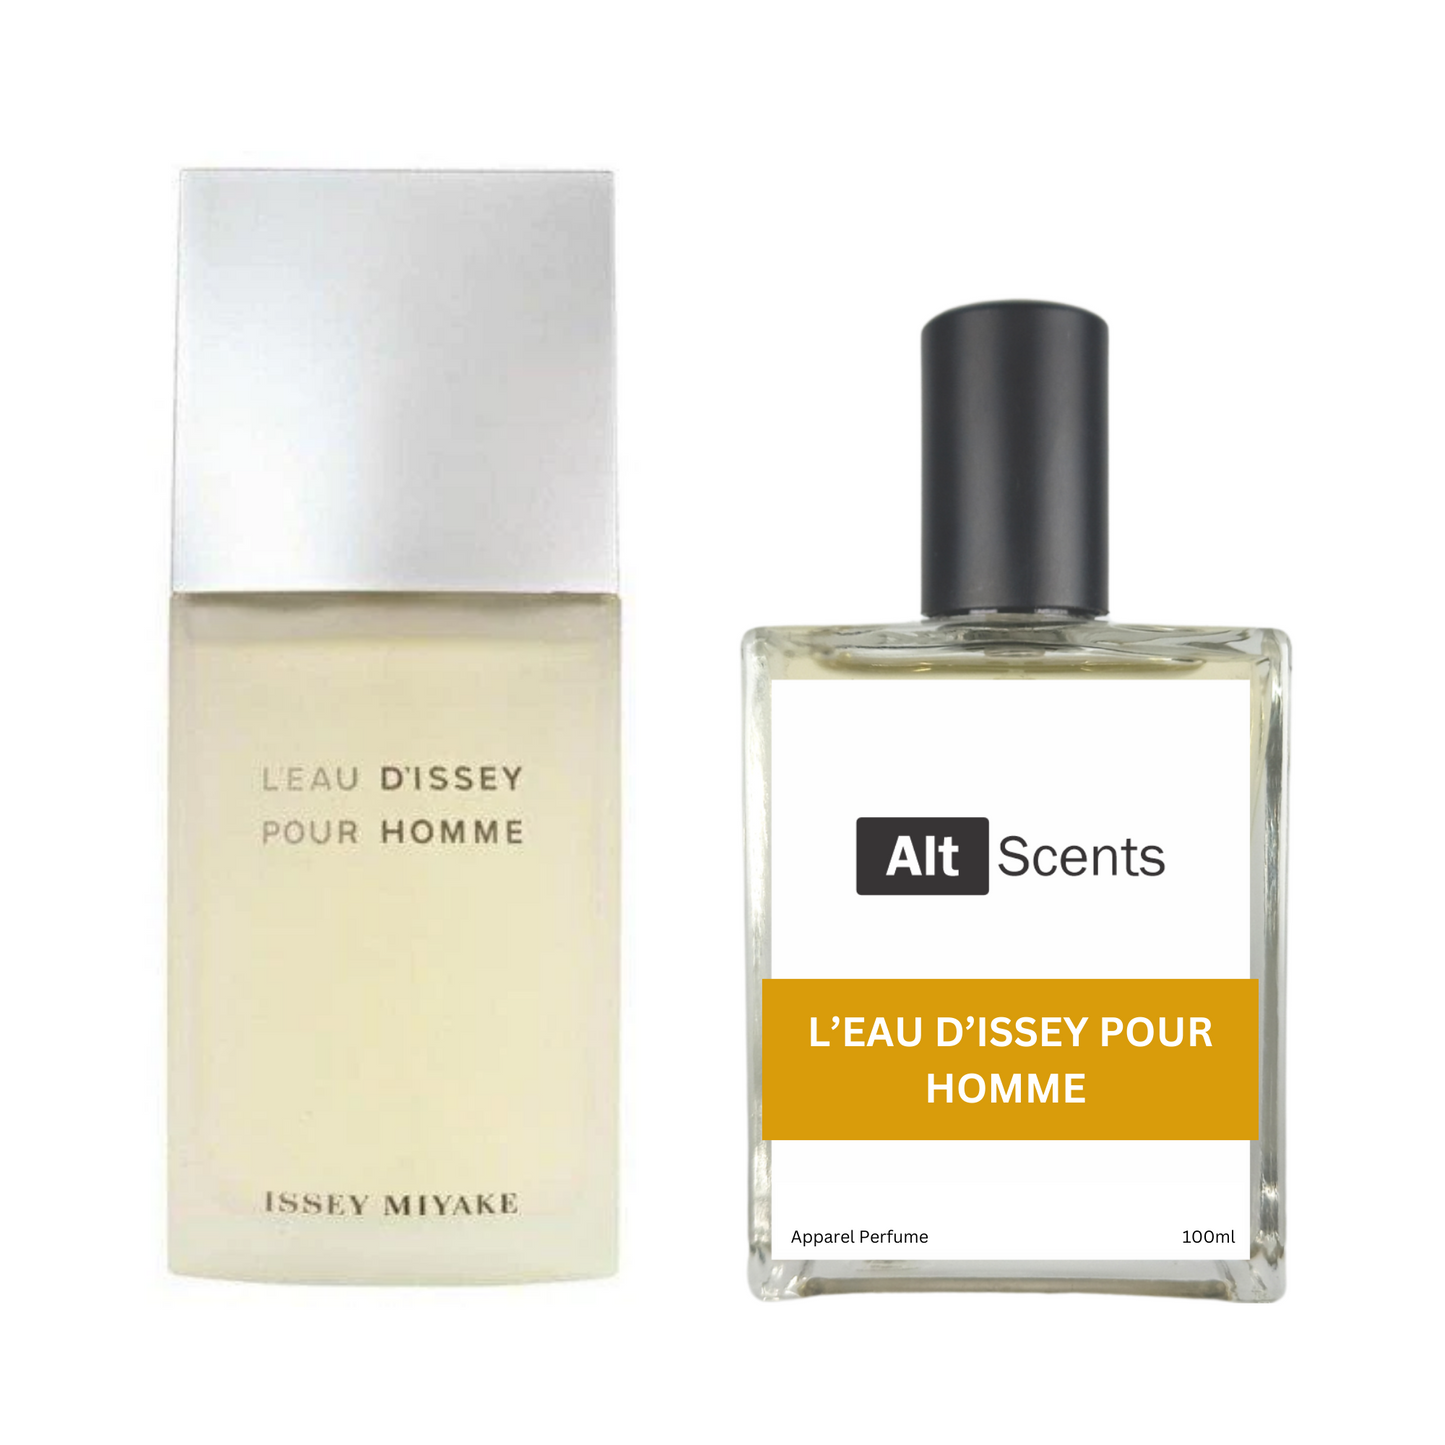 L'Eau d'Issey Pour Homme by Issey Miyake  perfume for Men